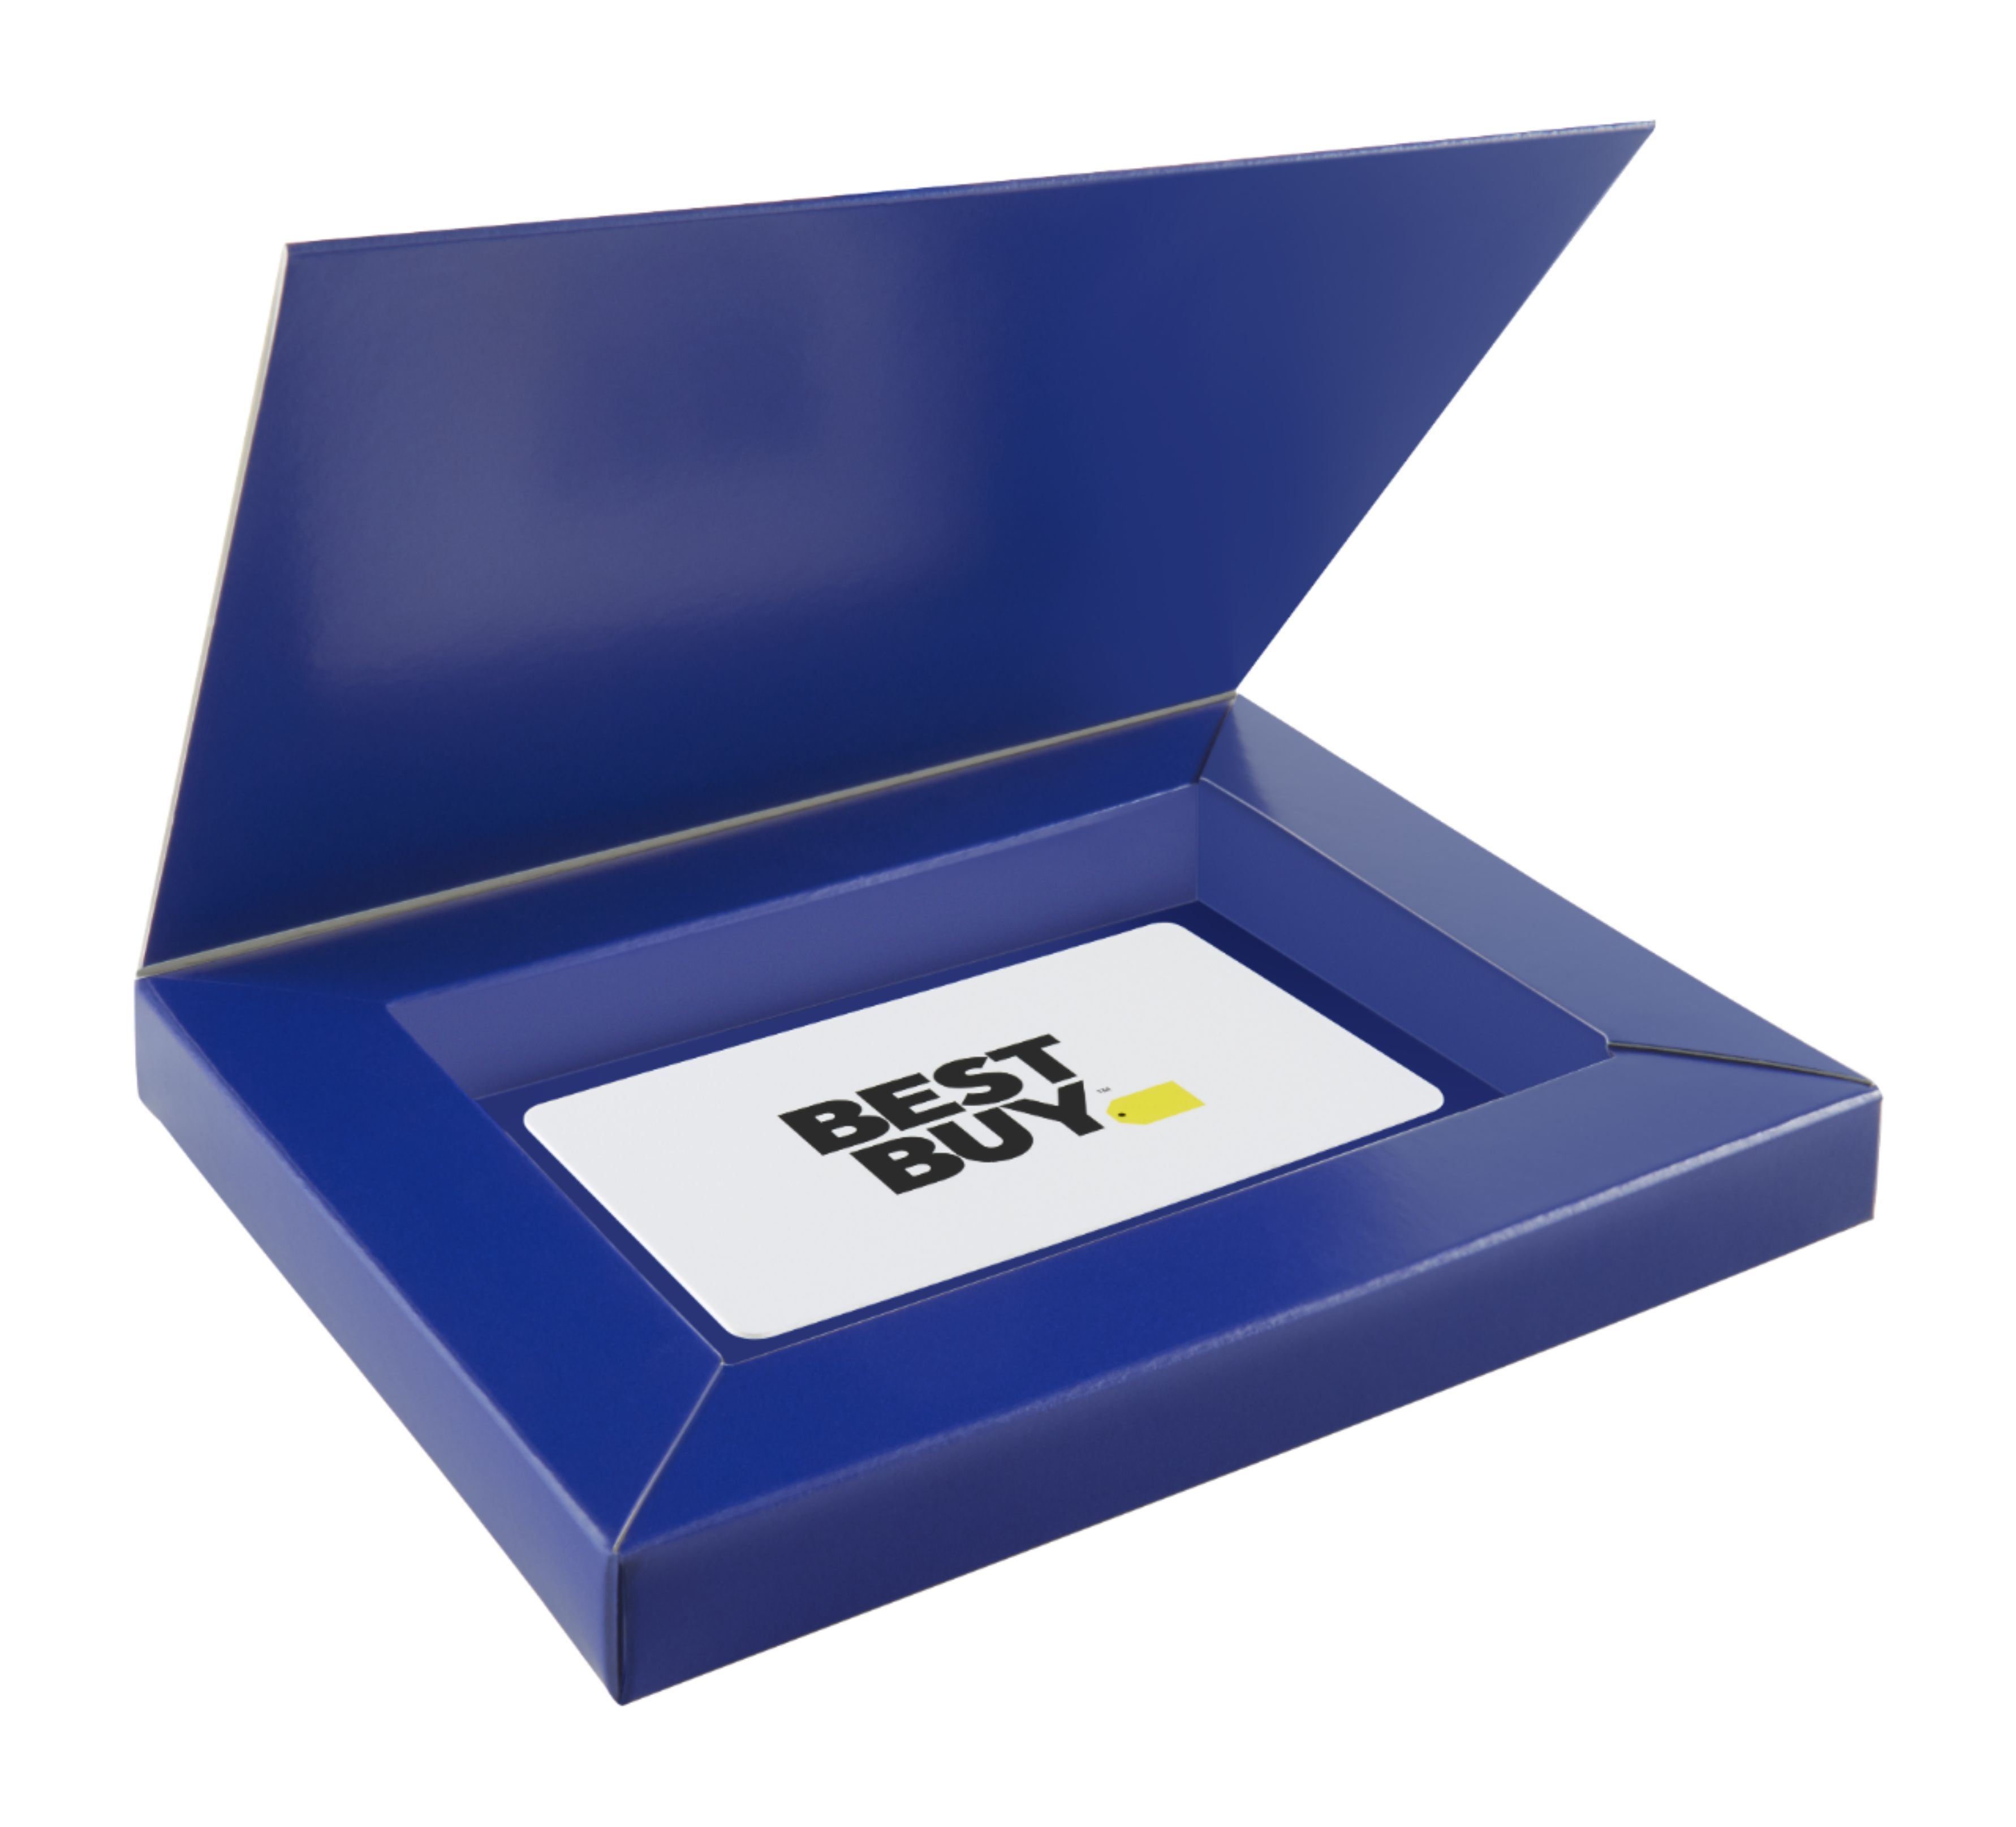 Best Buy® - $200 Best Buy gift card with gift box